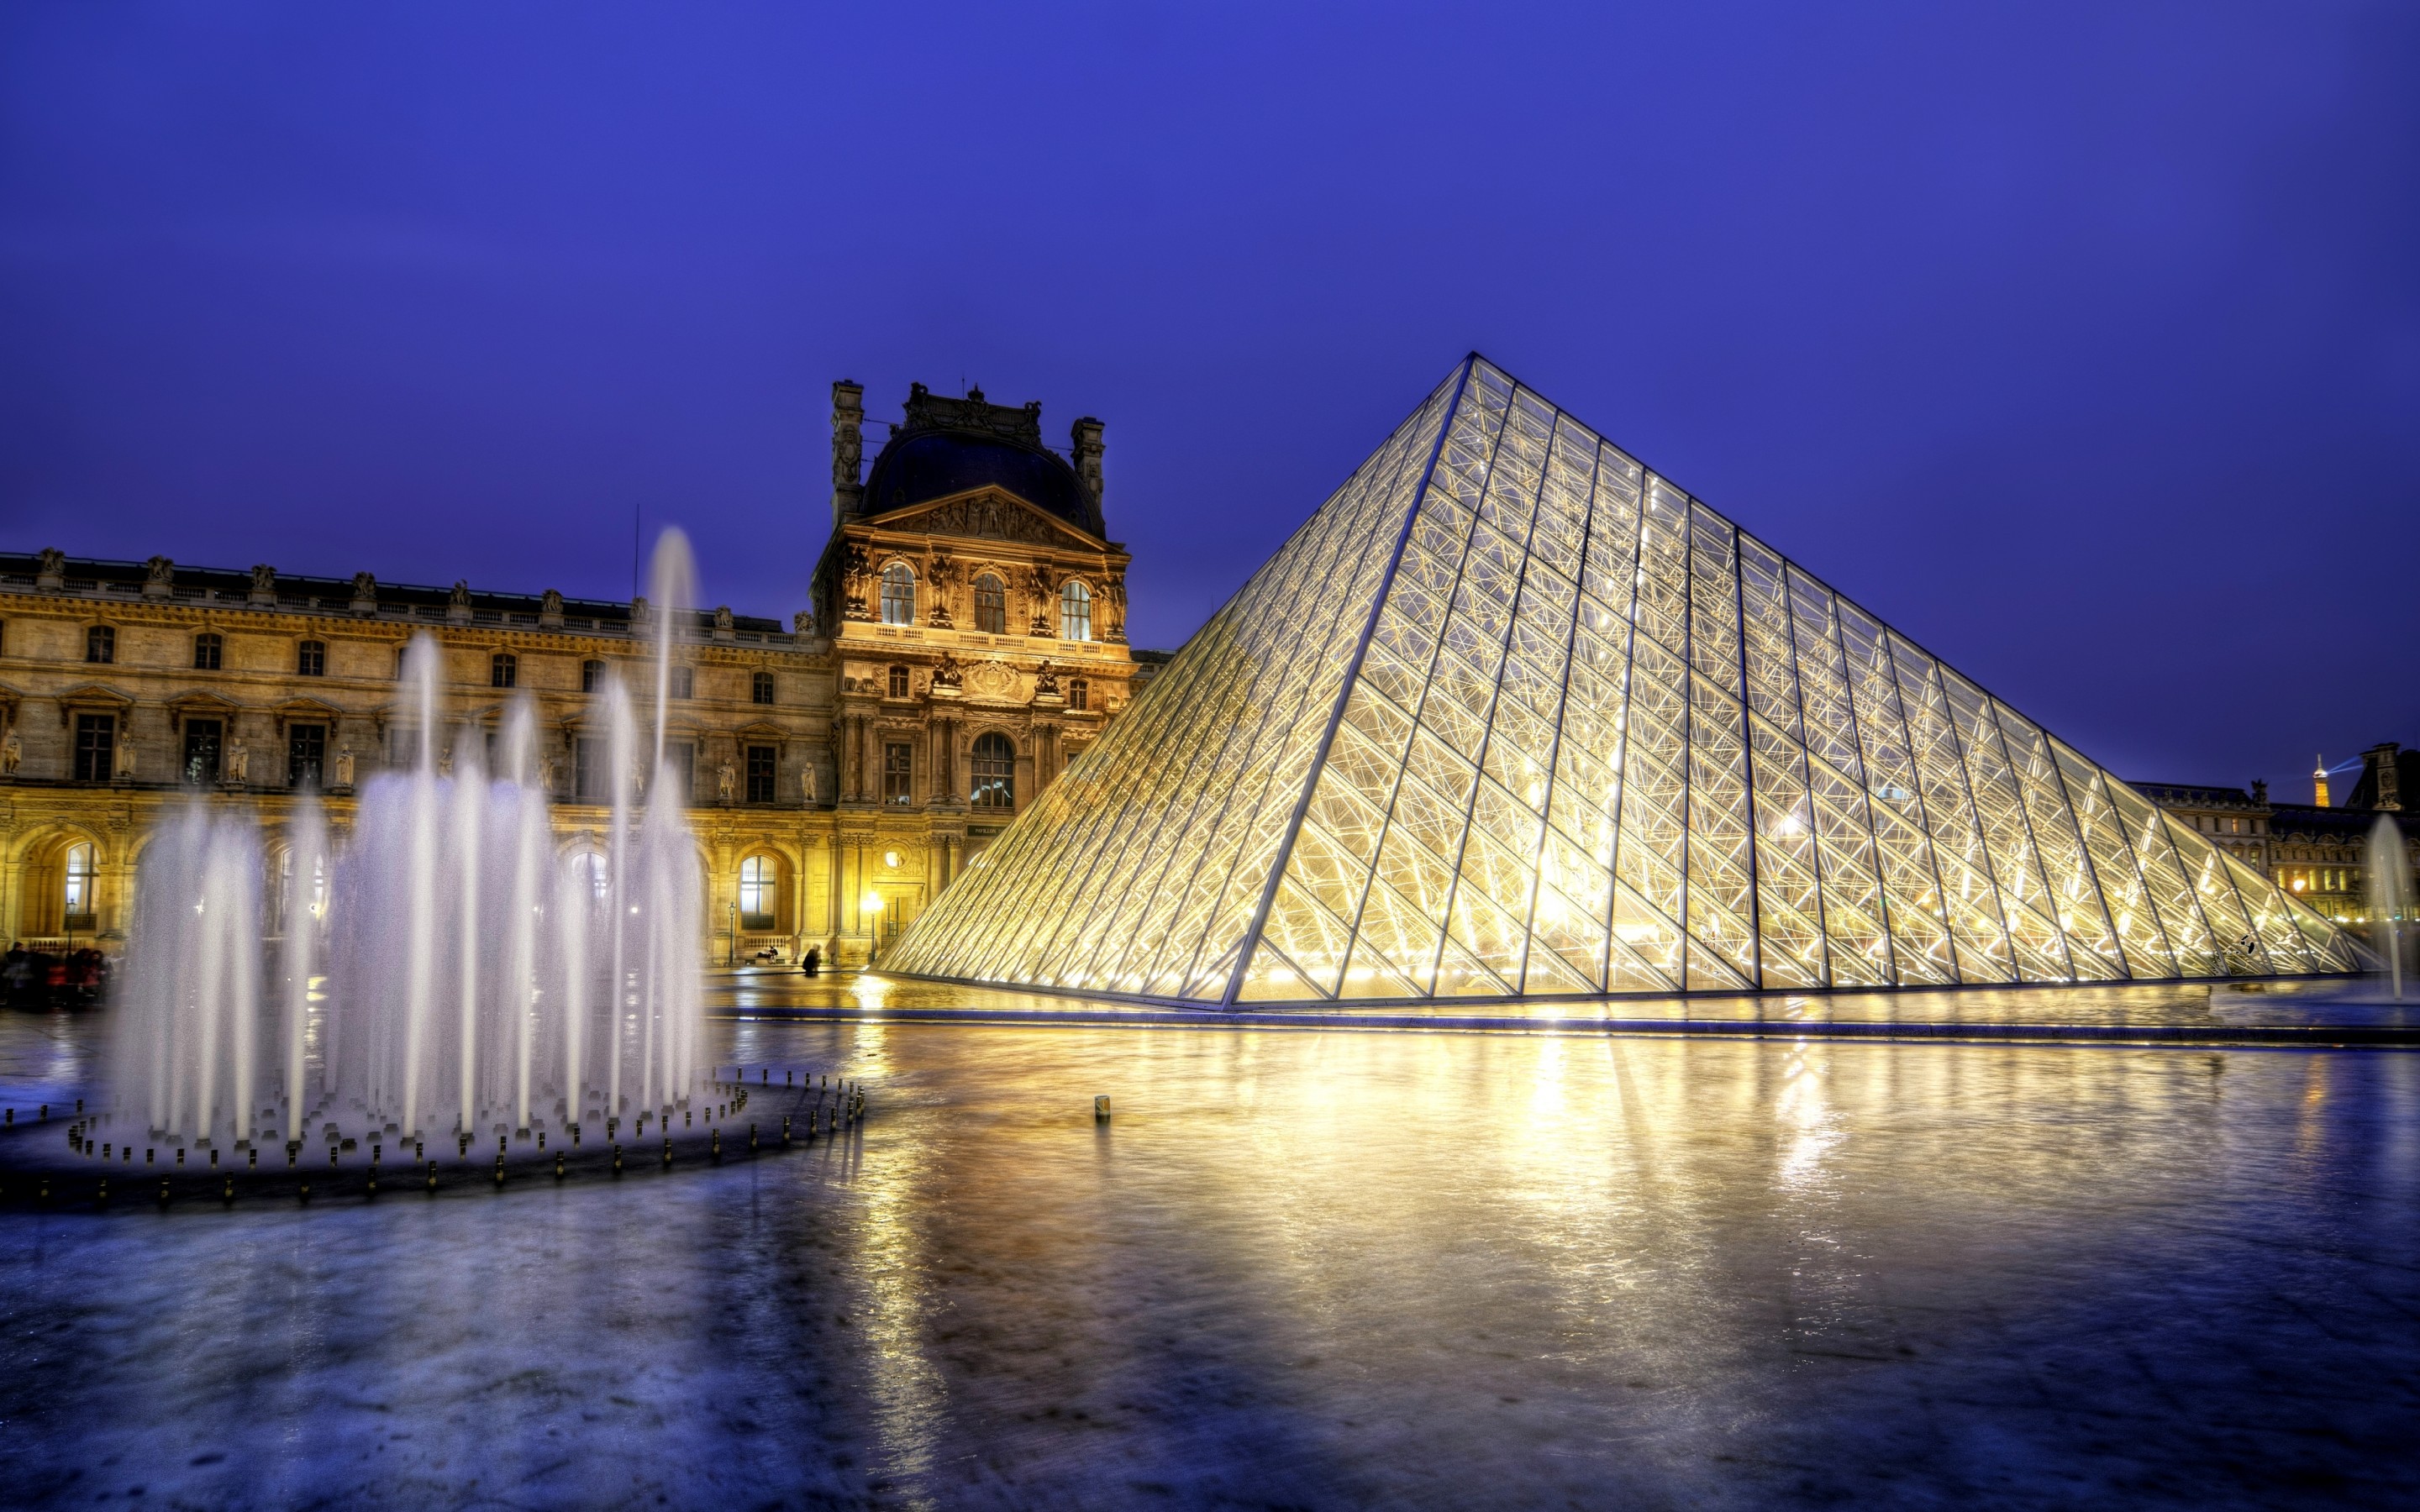 The Louvre #5